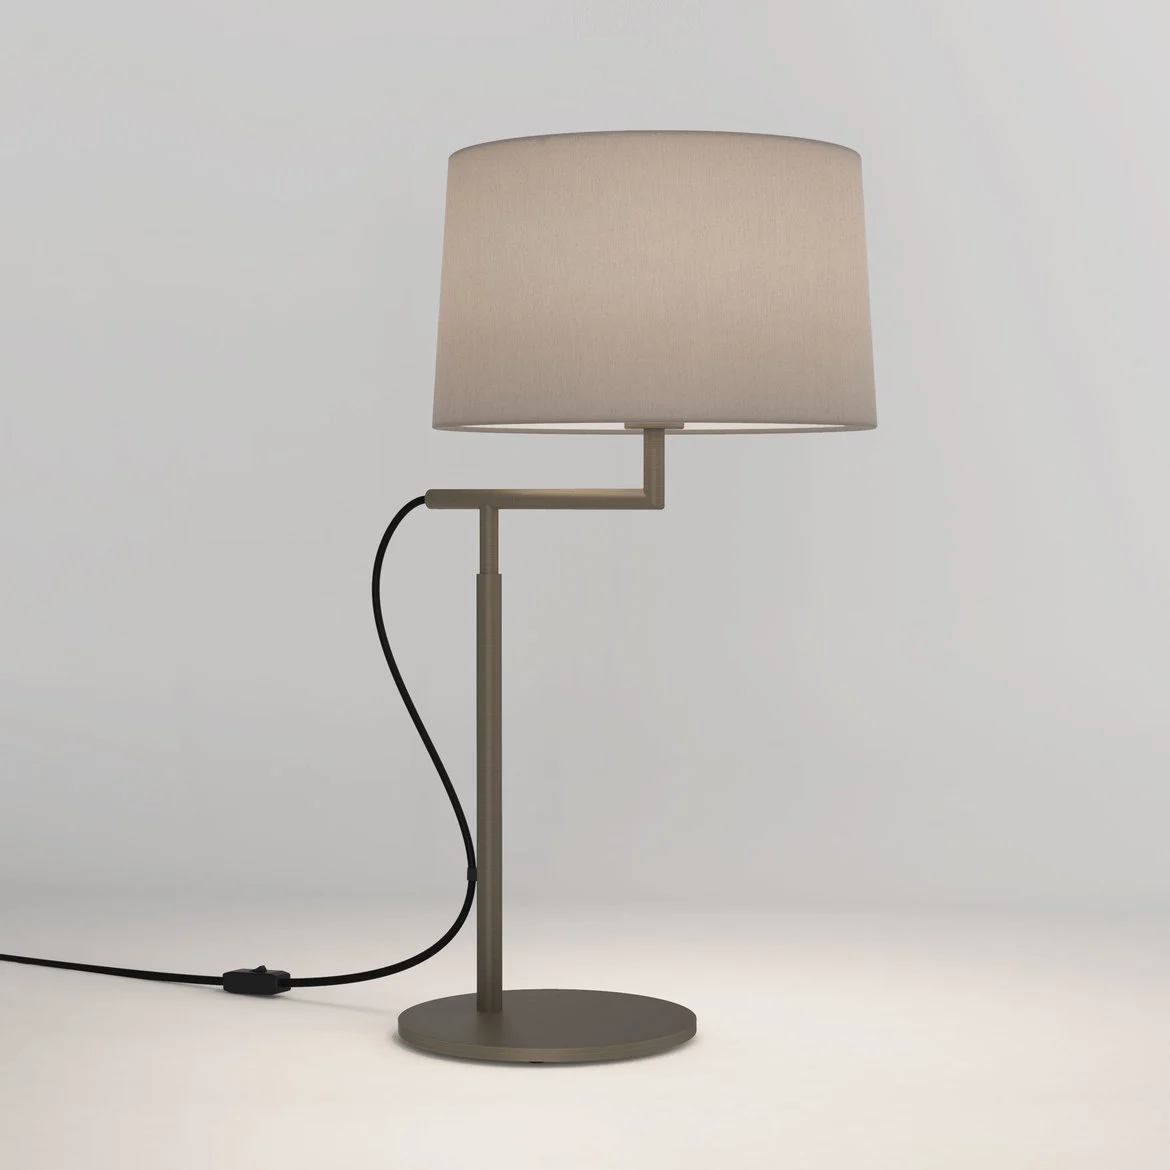 The Telegraph table light features a sleek, modern design with an angled arm and round base in a bronze finish. Available with a tapered shade in four colours: white, black, putty, and mocha.